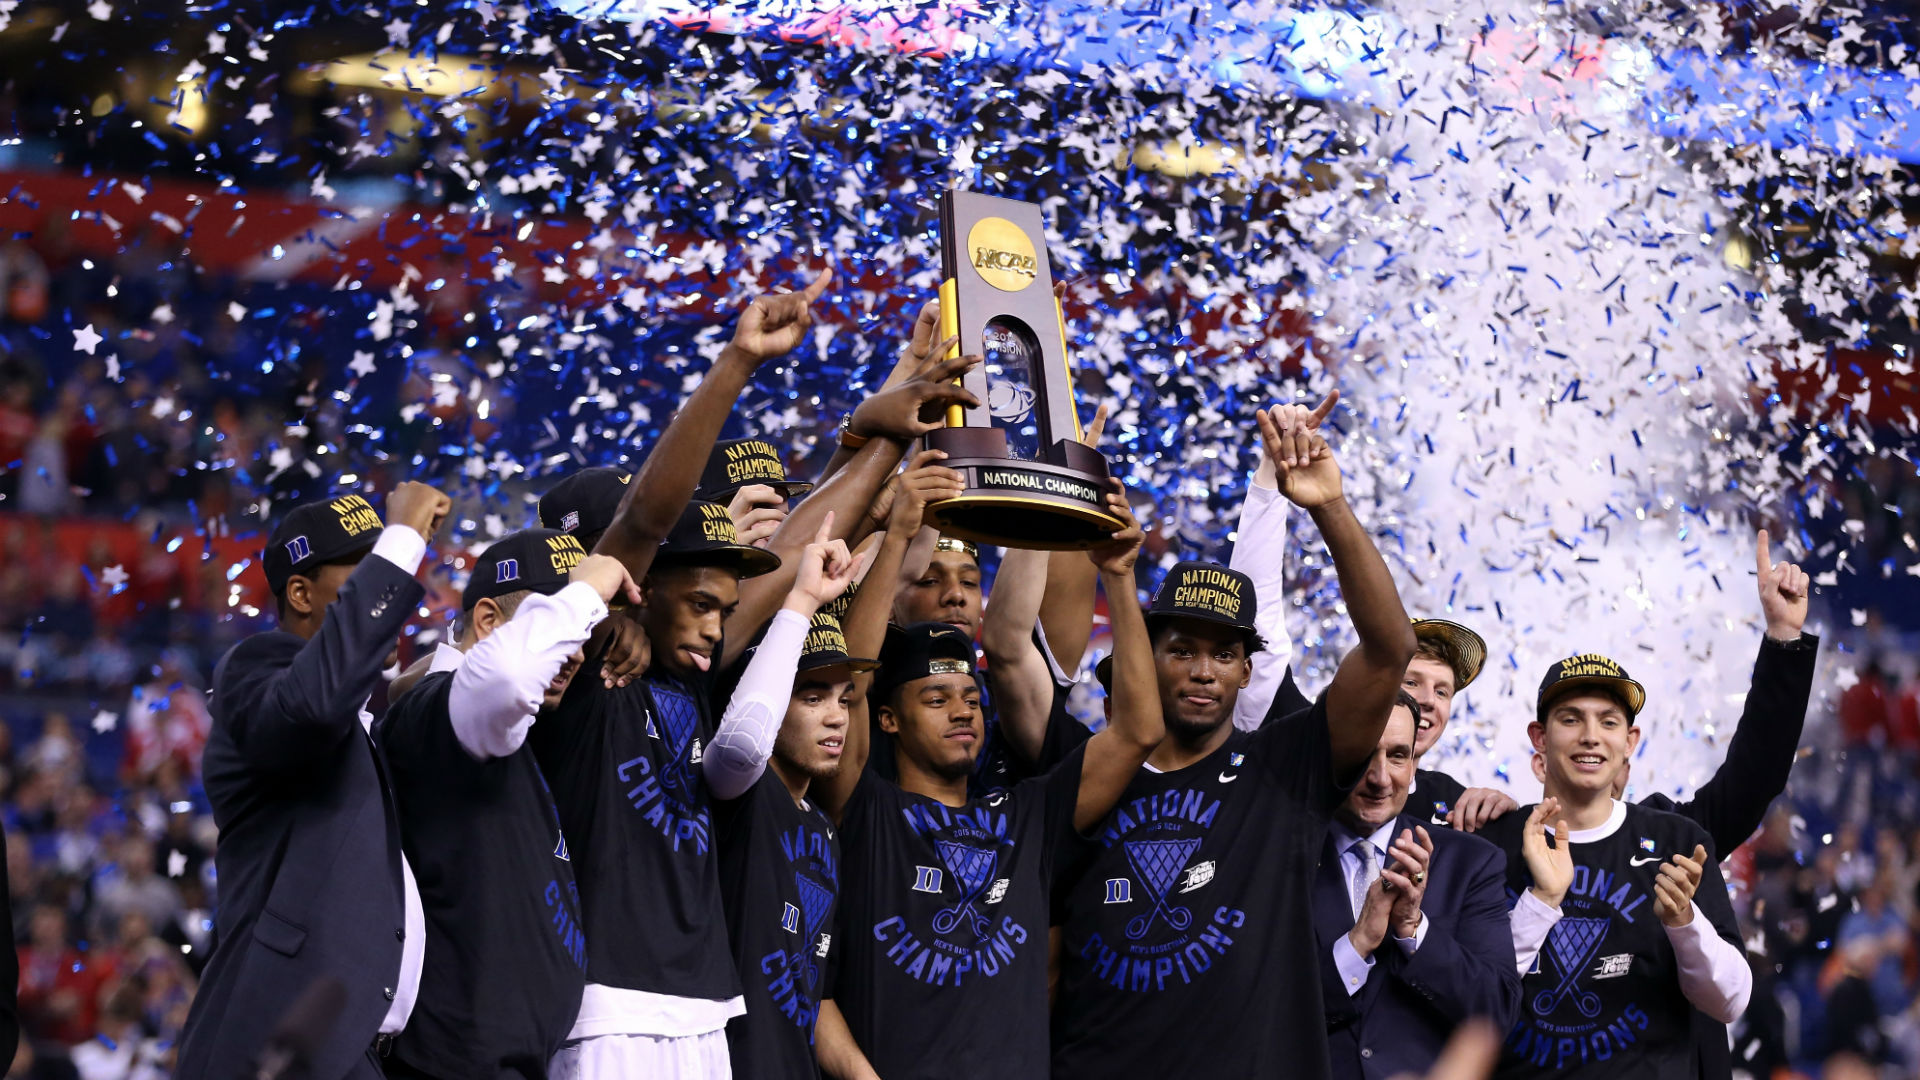 Top 16 college basketball programs since 2000: UNC or Duke at No. 1